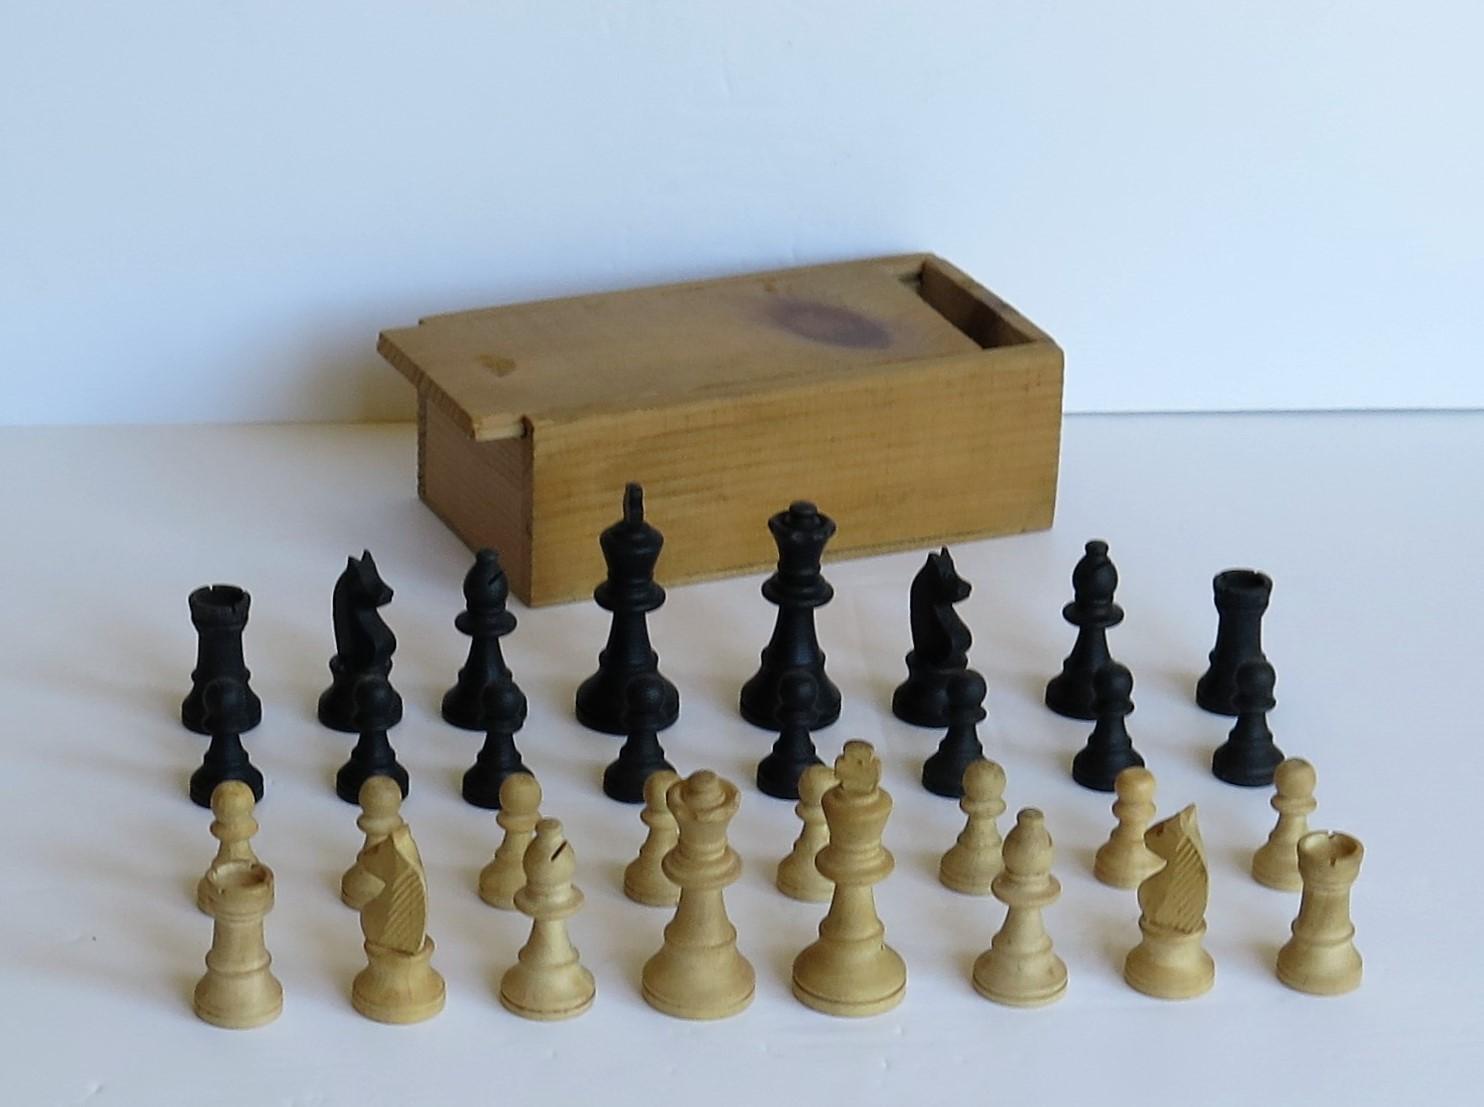 Hand-Crafted Handmade Wood Complete Chess Set Game in Pine Lidded Box, circa 1930